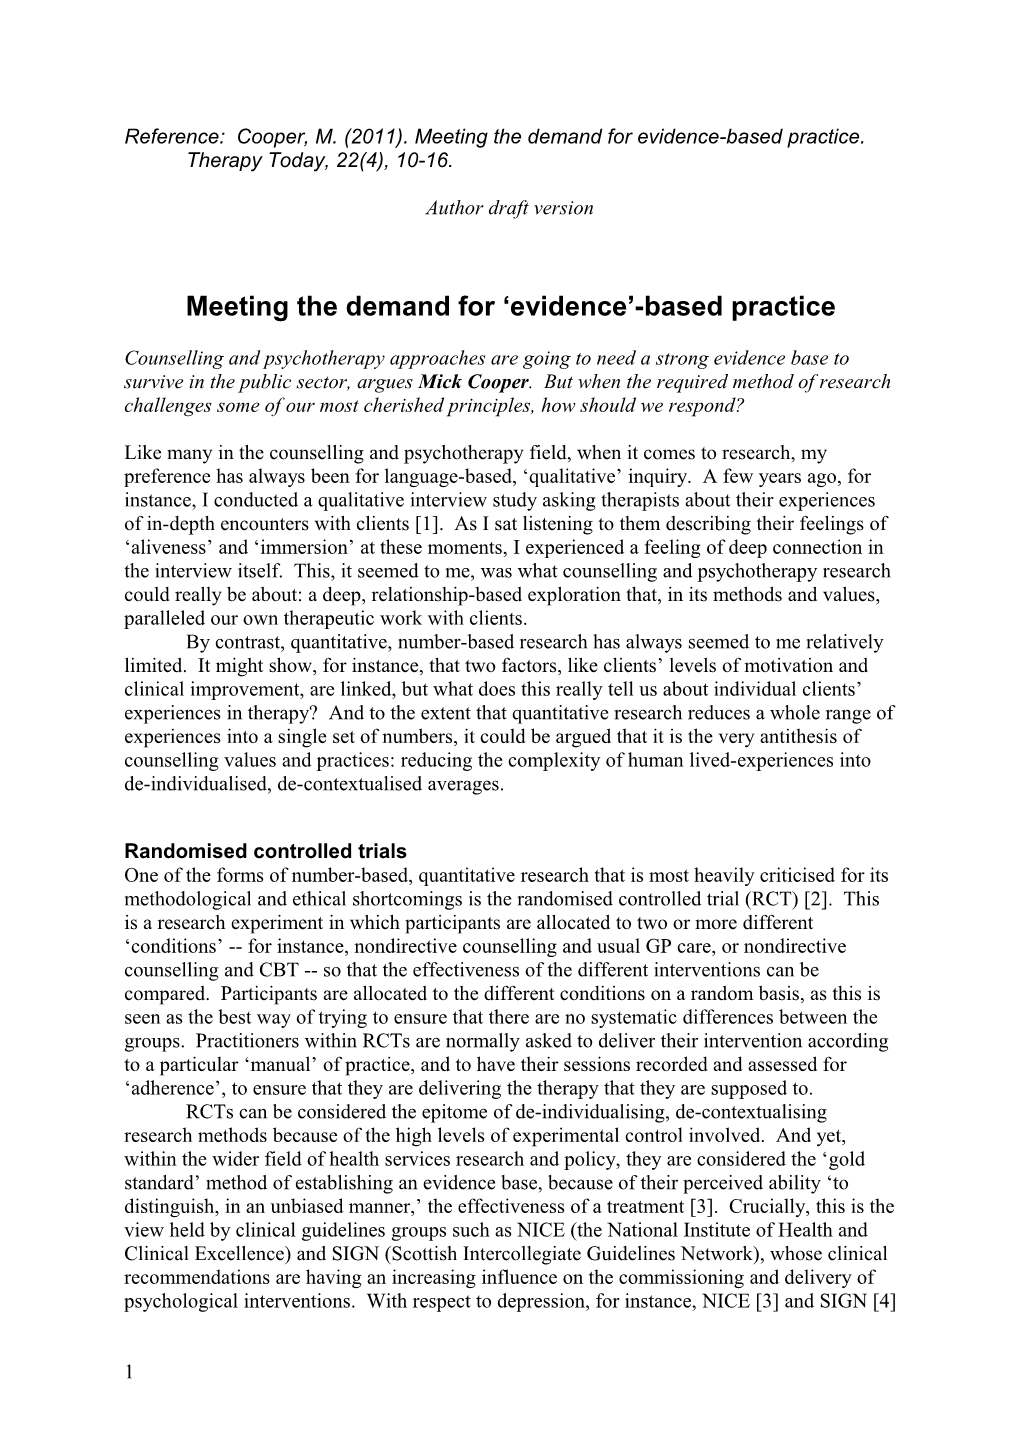 Meeting the Demand for Evidence -Based Practice